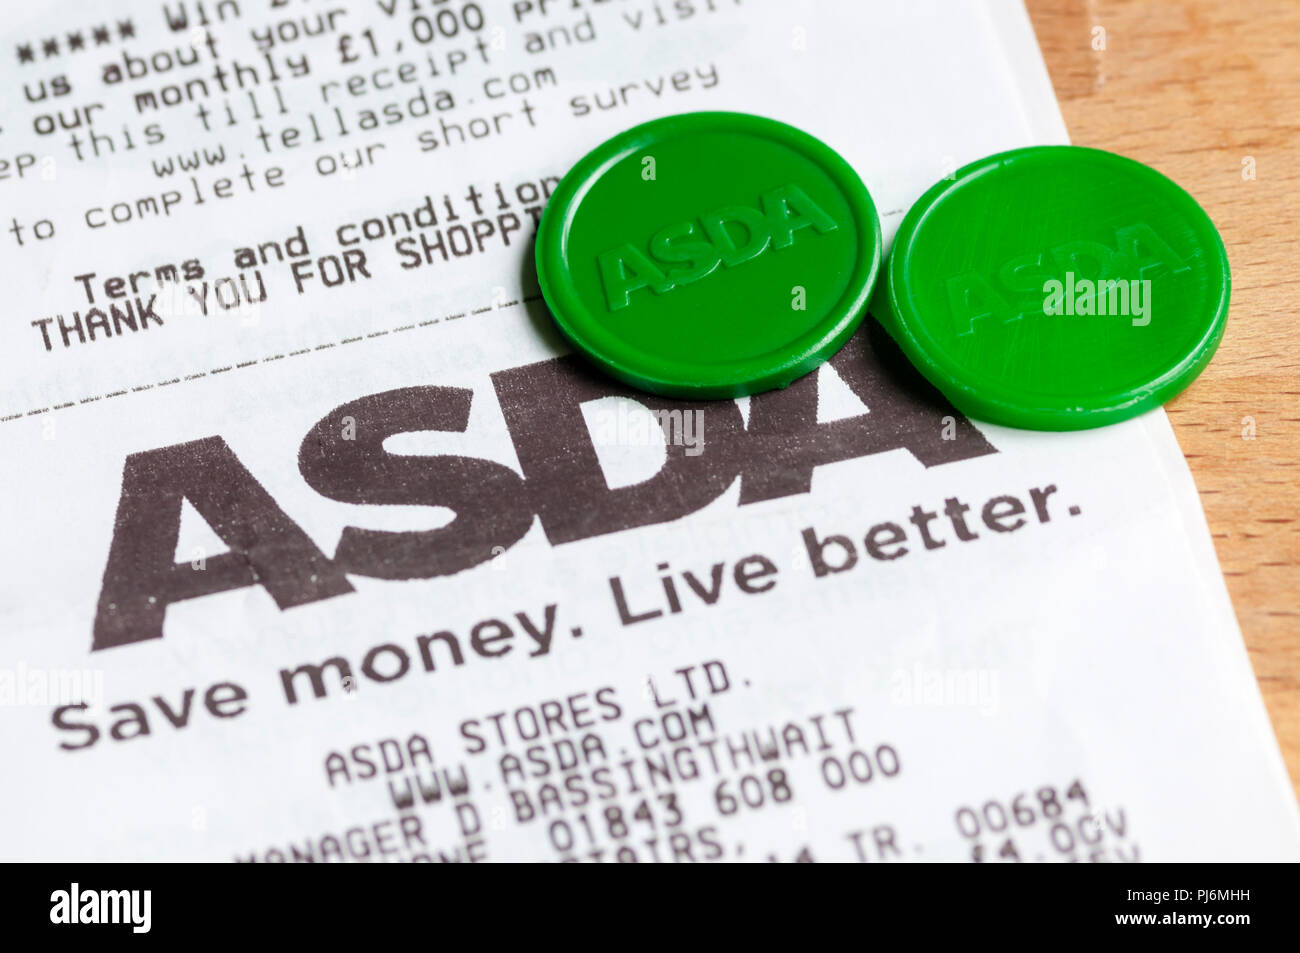 Asda Foundation green tokens, which customer's earn on each shop and donate to selected charities. Stock Photo